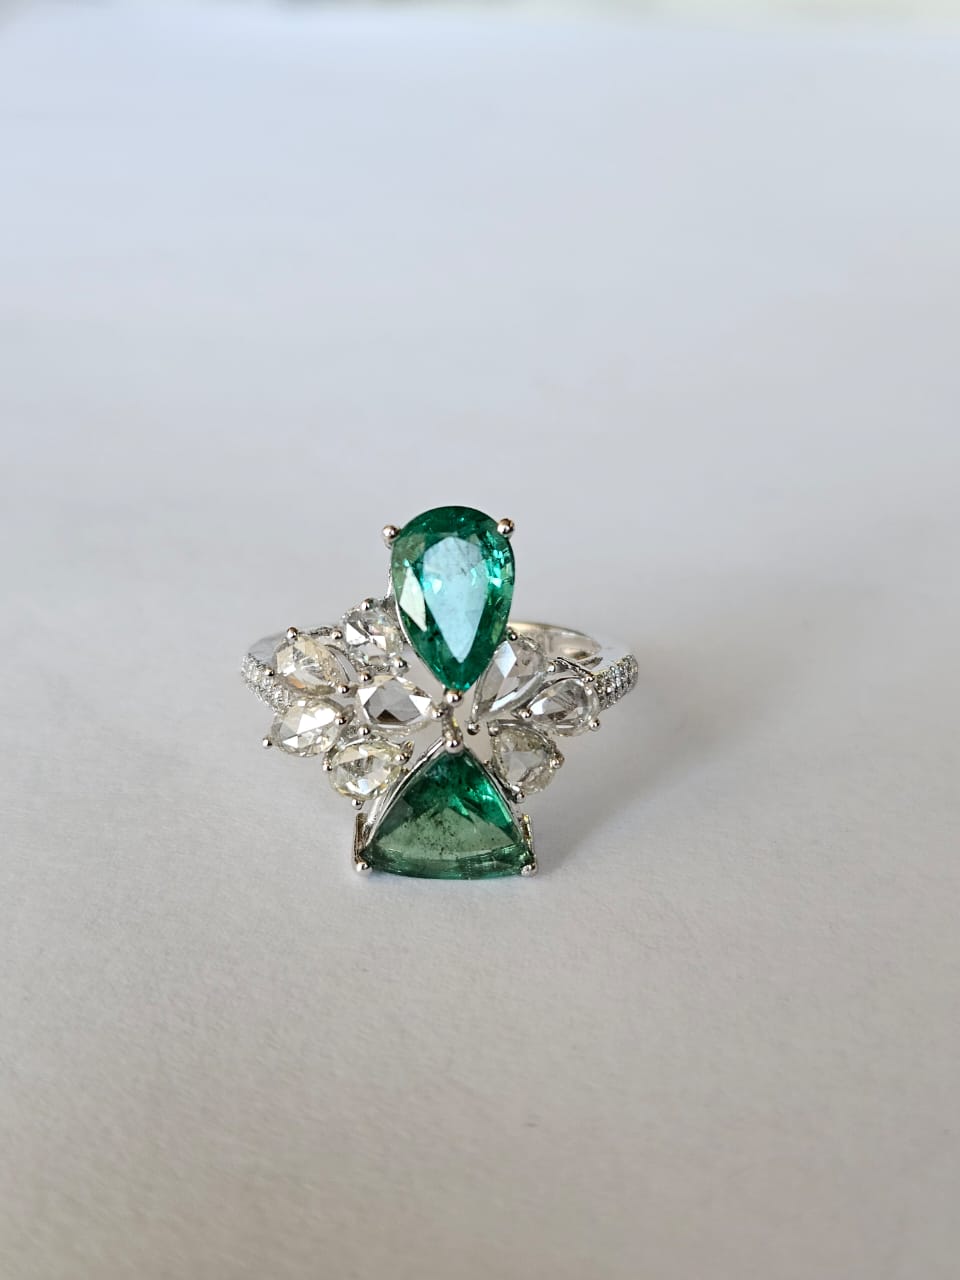 A very gorgeous and beautiful, Emerald Engagement Ring set in 18K White Gold & Diamonds. The weight of the Emeralds is 2.84 carats. The Emeralds are completely natural, without any treatment and are of Zambian origin. The combined Diamonds weight is